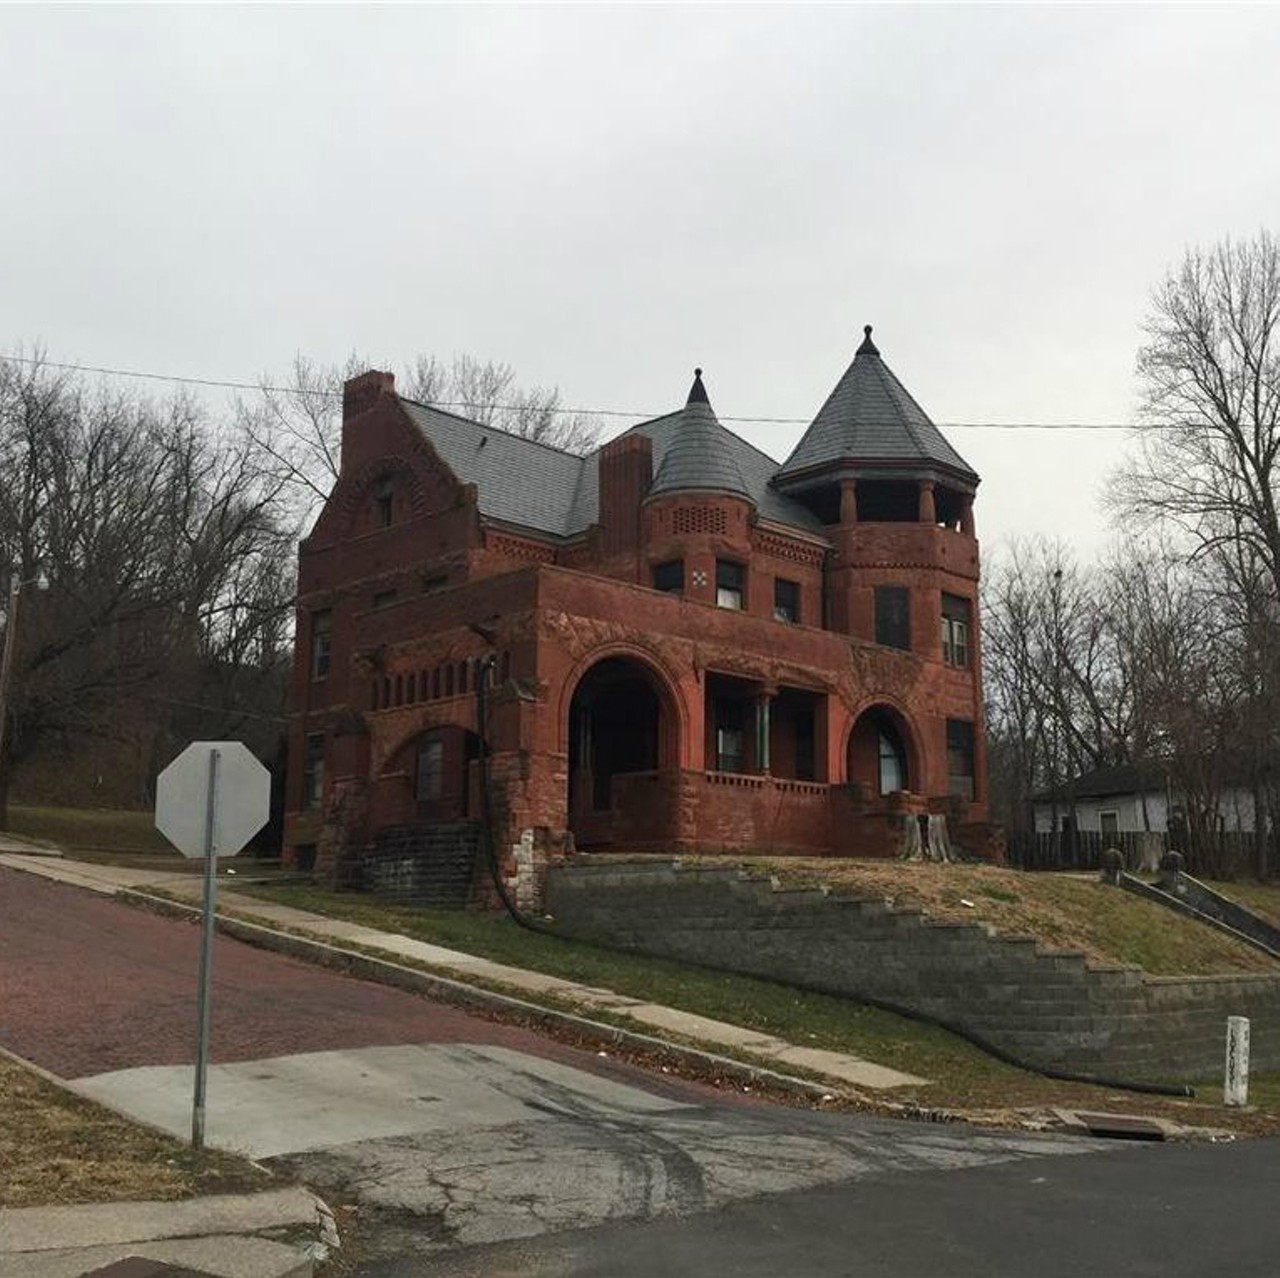 This Gorgeous Old Mansion in St. Joseph Looks Haunted AF